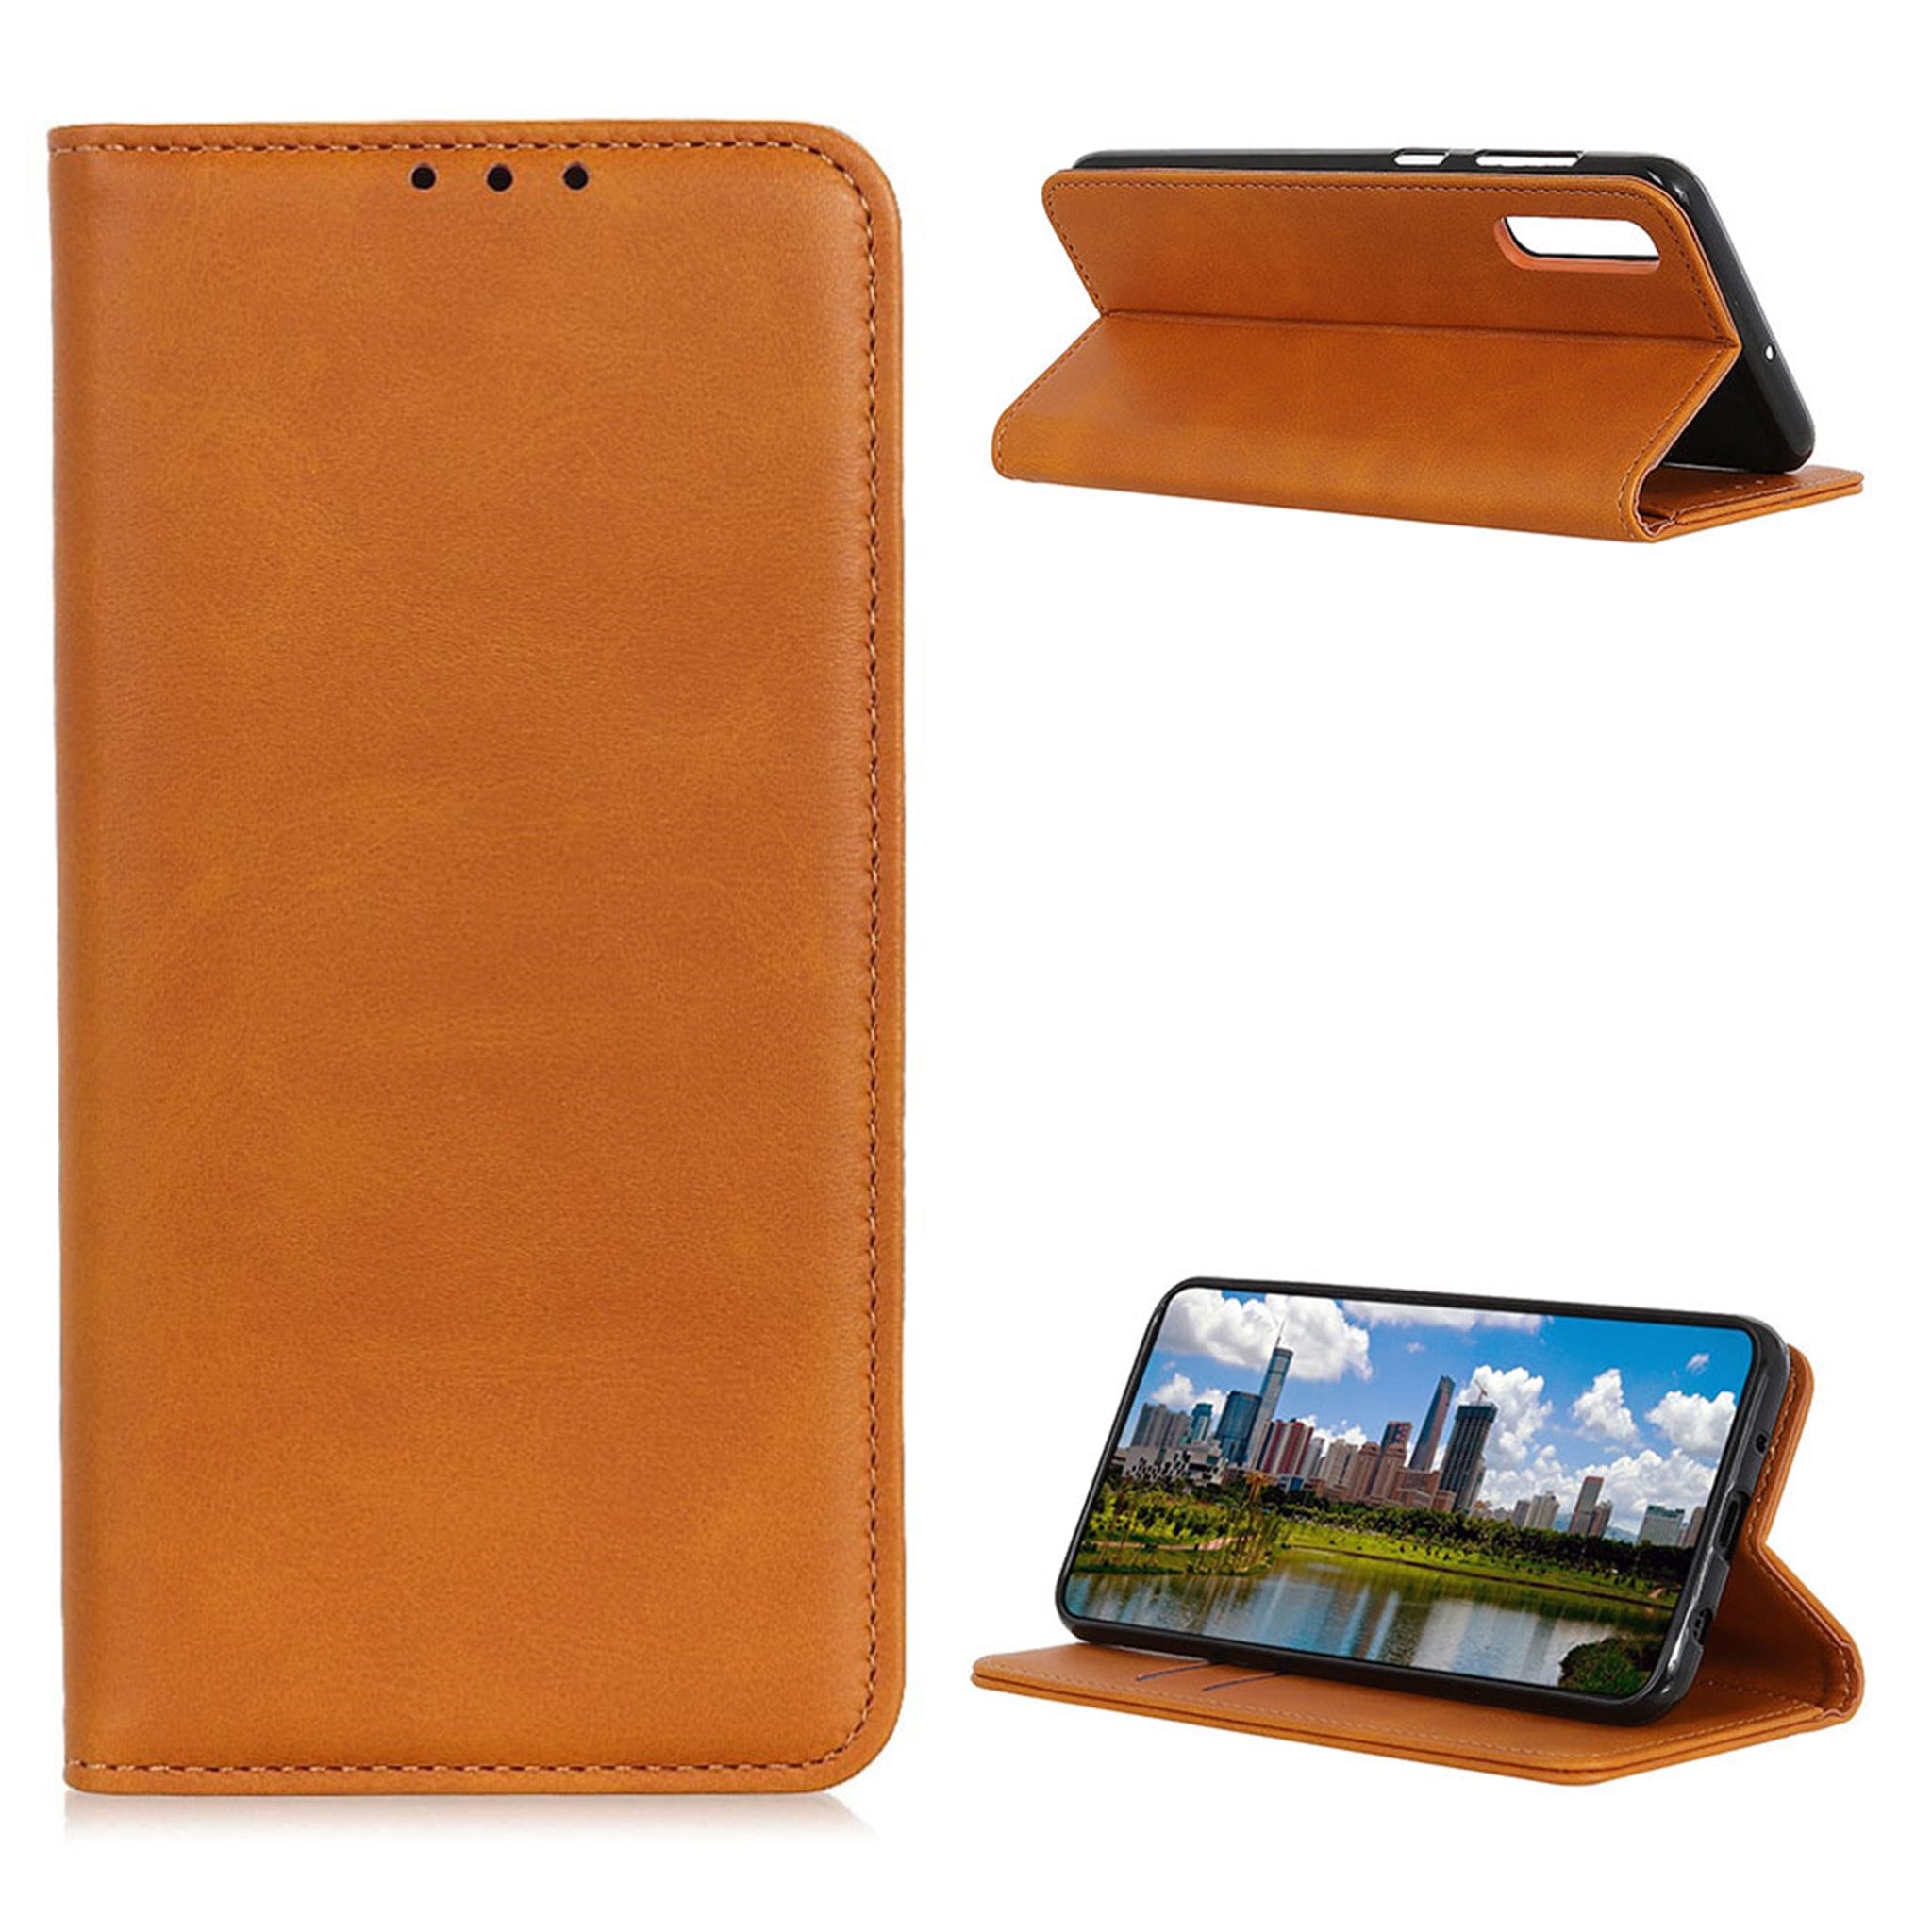 Wallet-style genuine leather flipcase for Sony Xperia Ace 2 - Brown